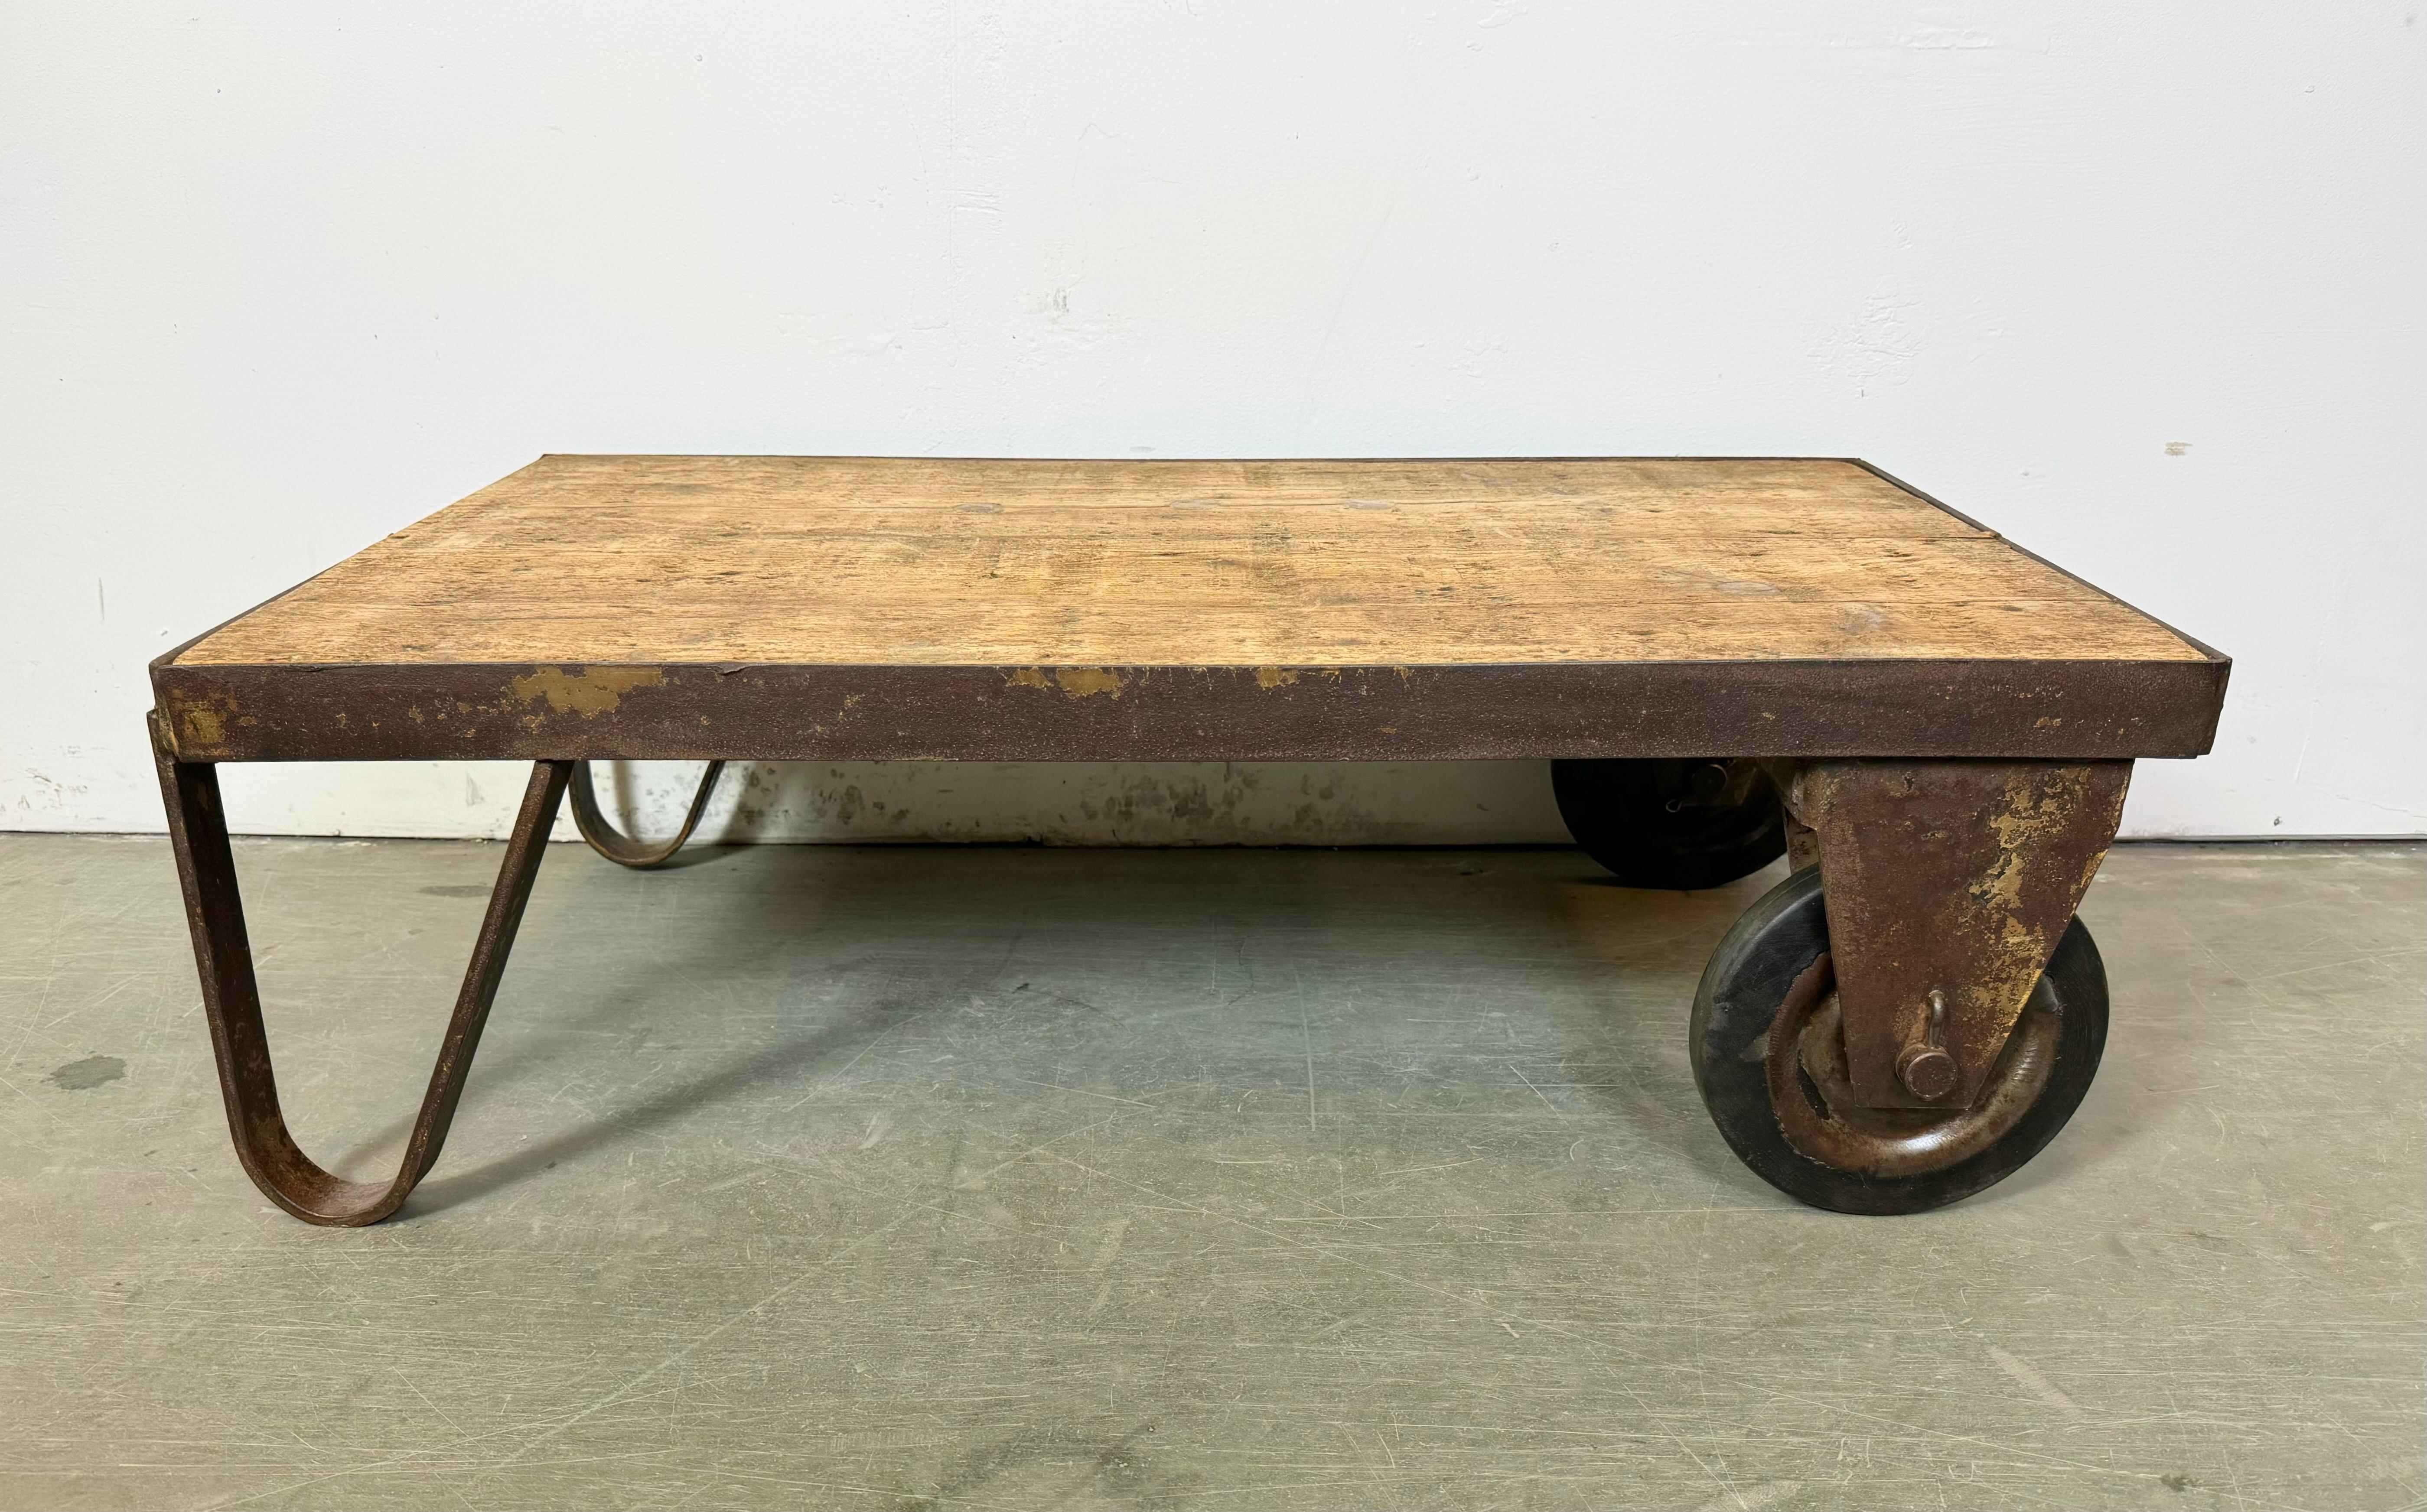 Former pallet truck from a factory now serves as a coffee table. It features a yellow iron construction with two original wheels and a solid wooden plate. The weight of the table is 25 kg.